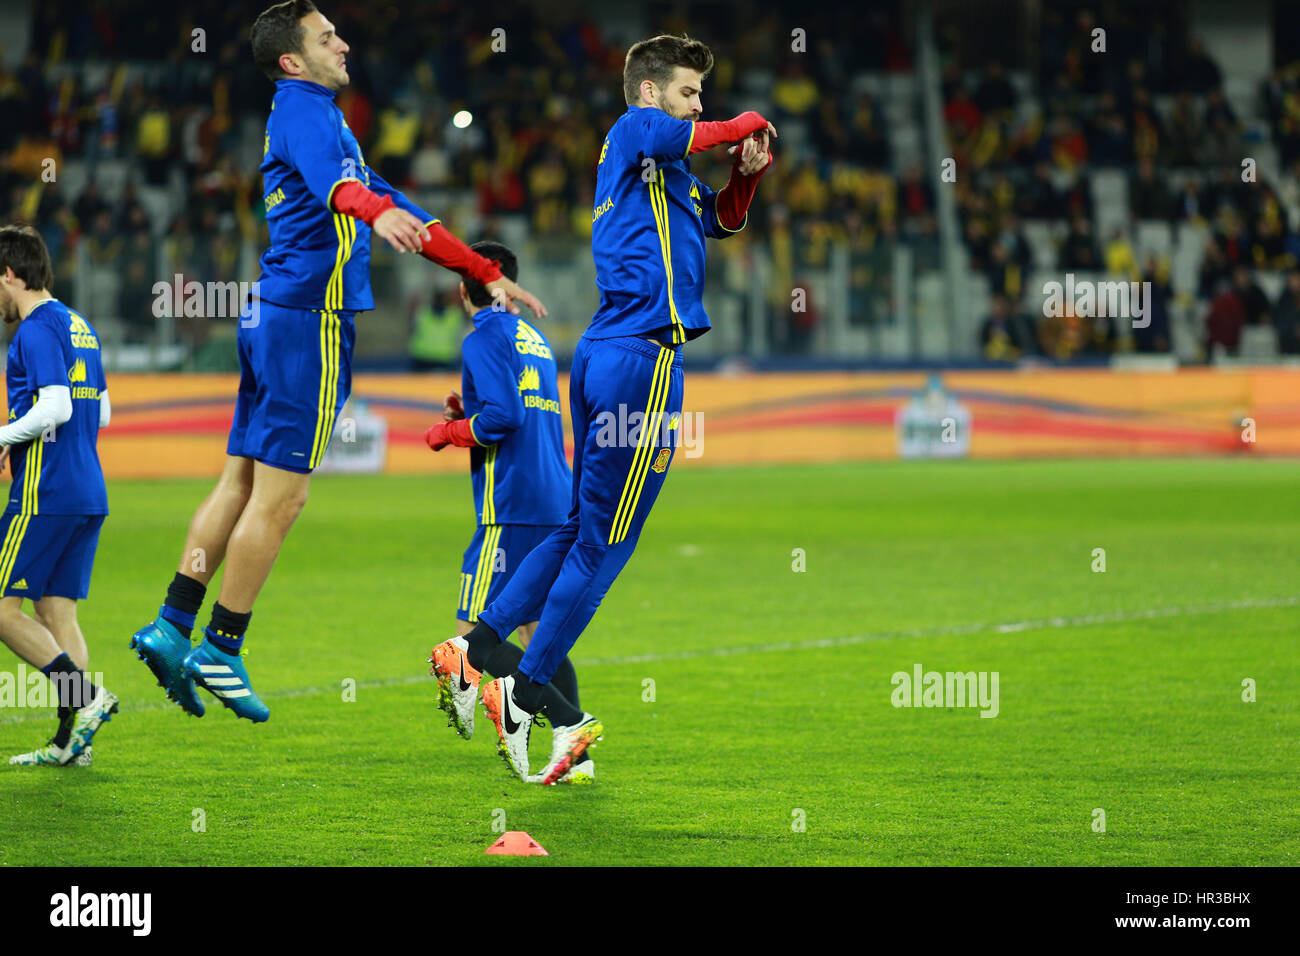 CLUJ-NAPOCA, ROMANIA - MARCH 27, 2016: Soccer players of the National Team of Spain exercising during the warm-up session before a match against Roman Stock Photo